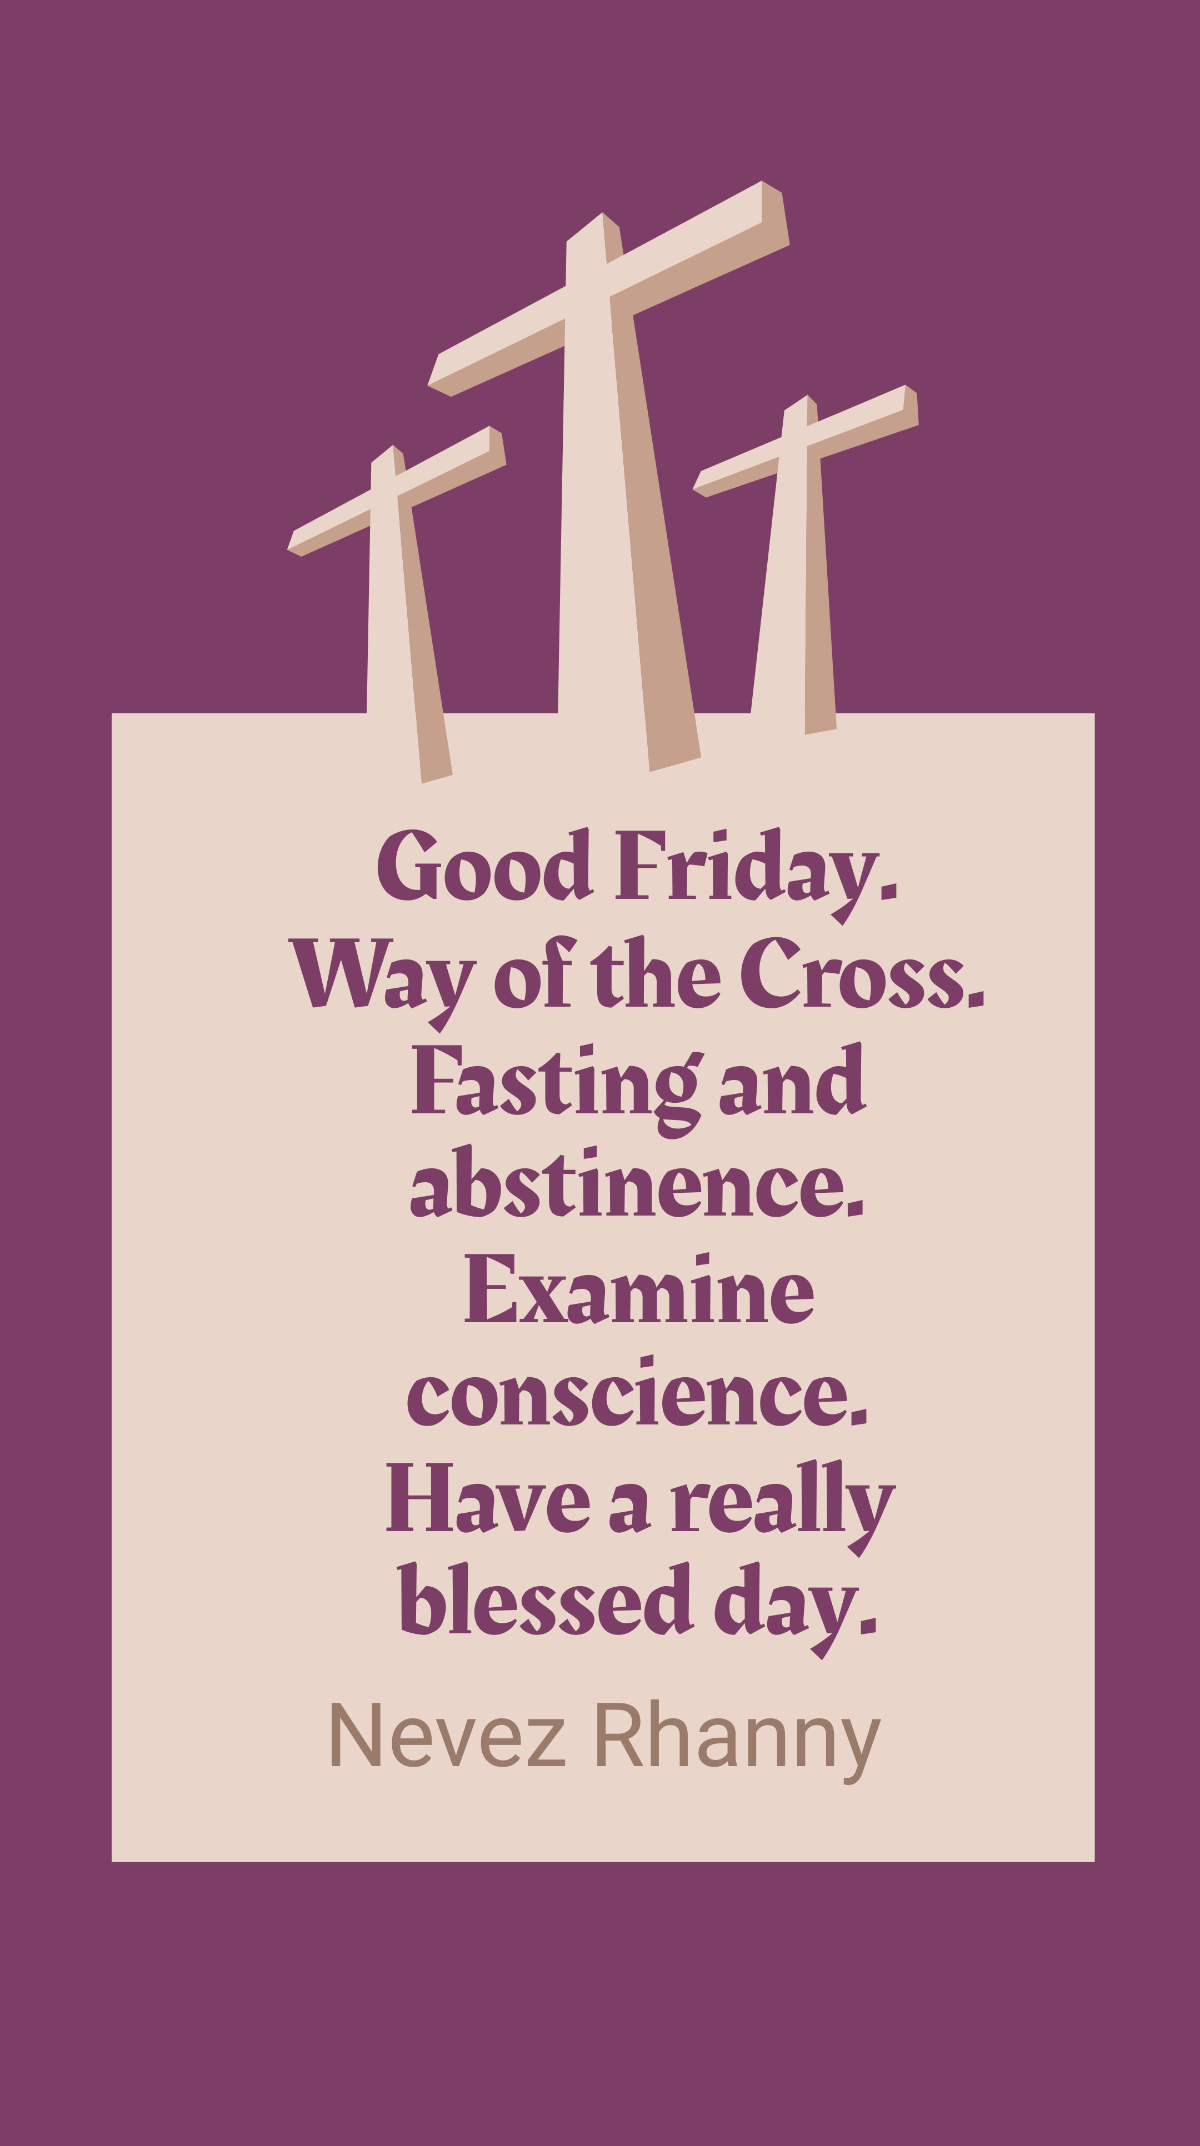 Nevez Rhanny - Good Friday. Way of the Cross. Fasting and abstinence. Examine conscience. Have a really blessed day. Template